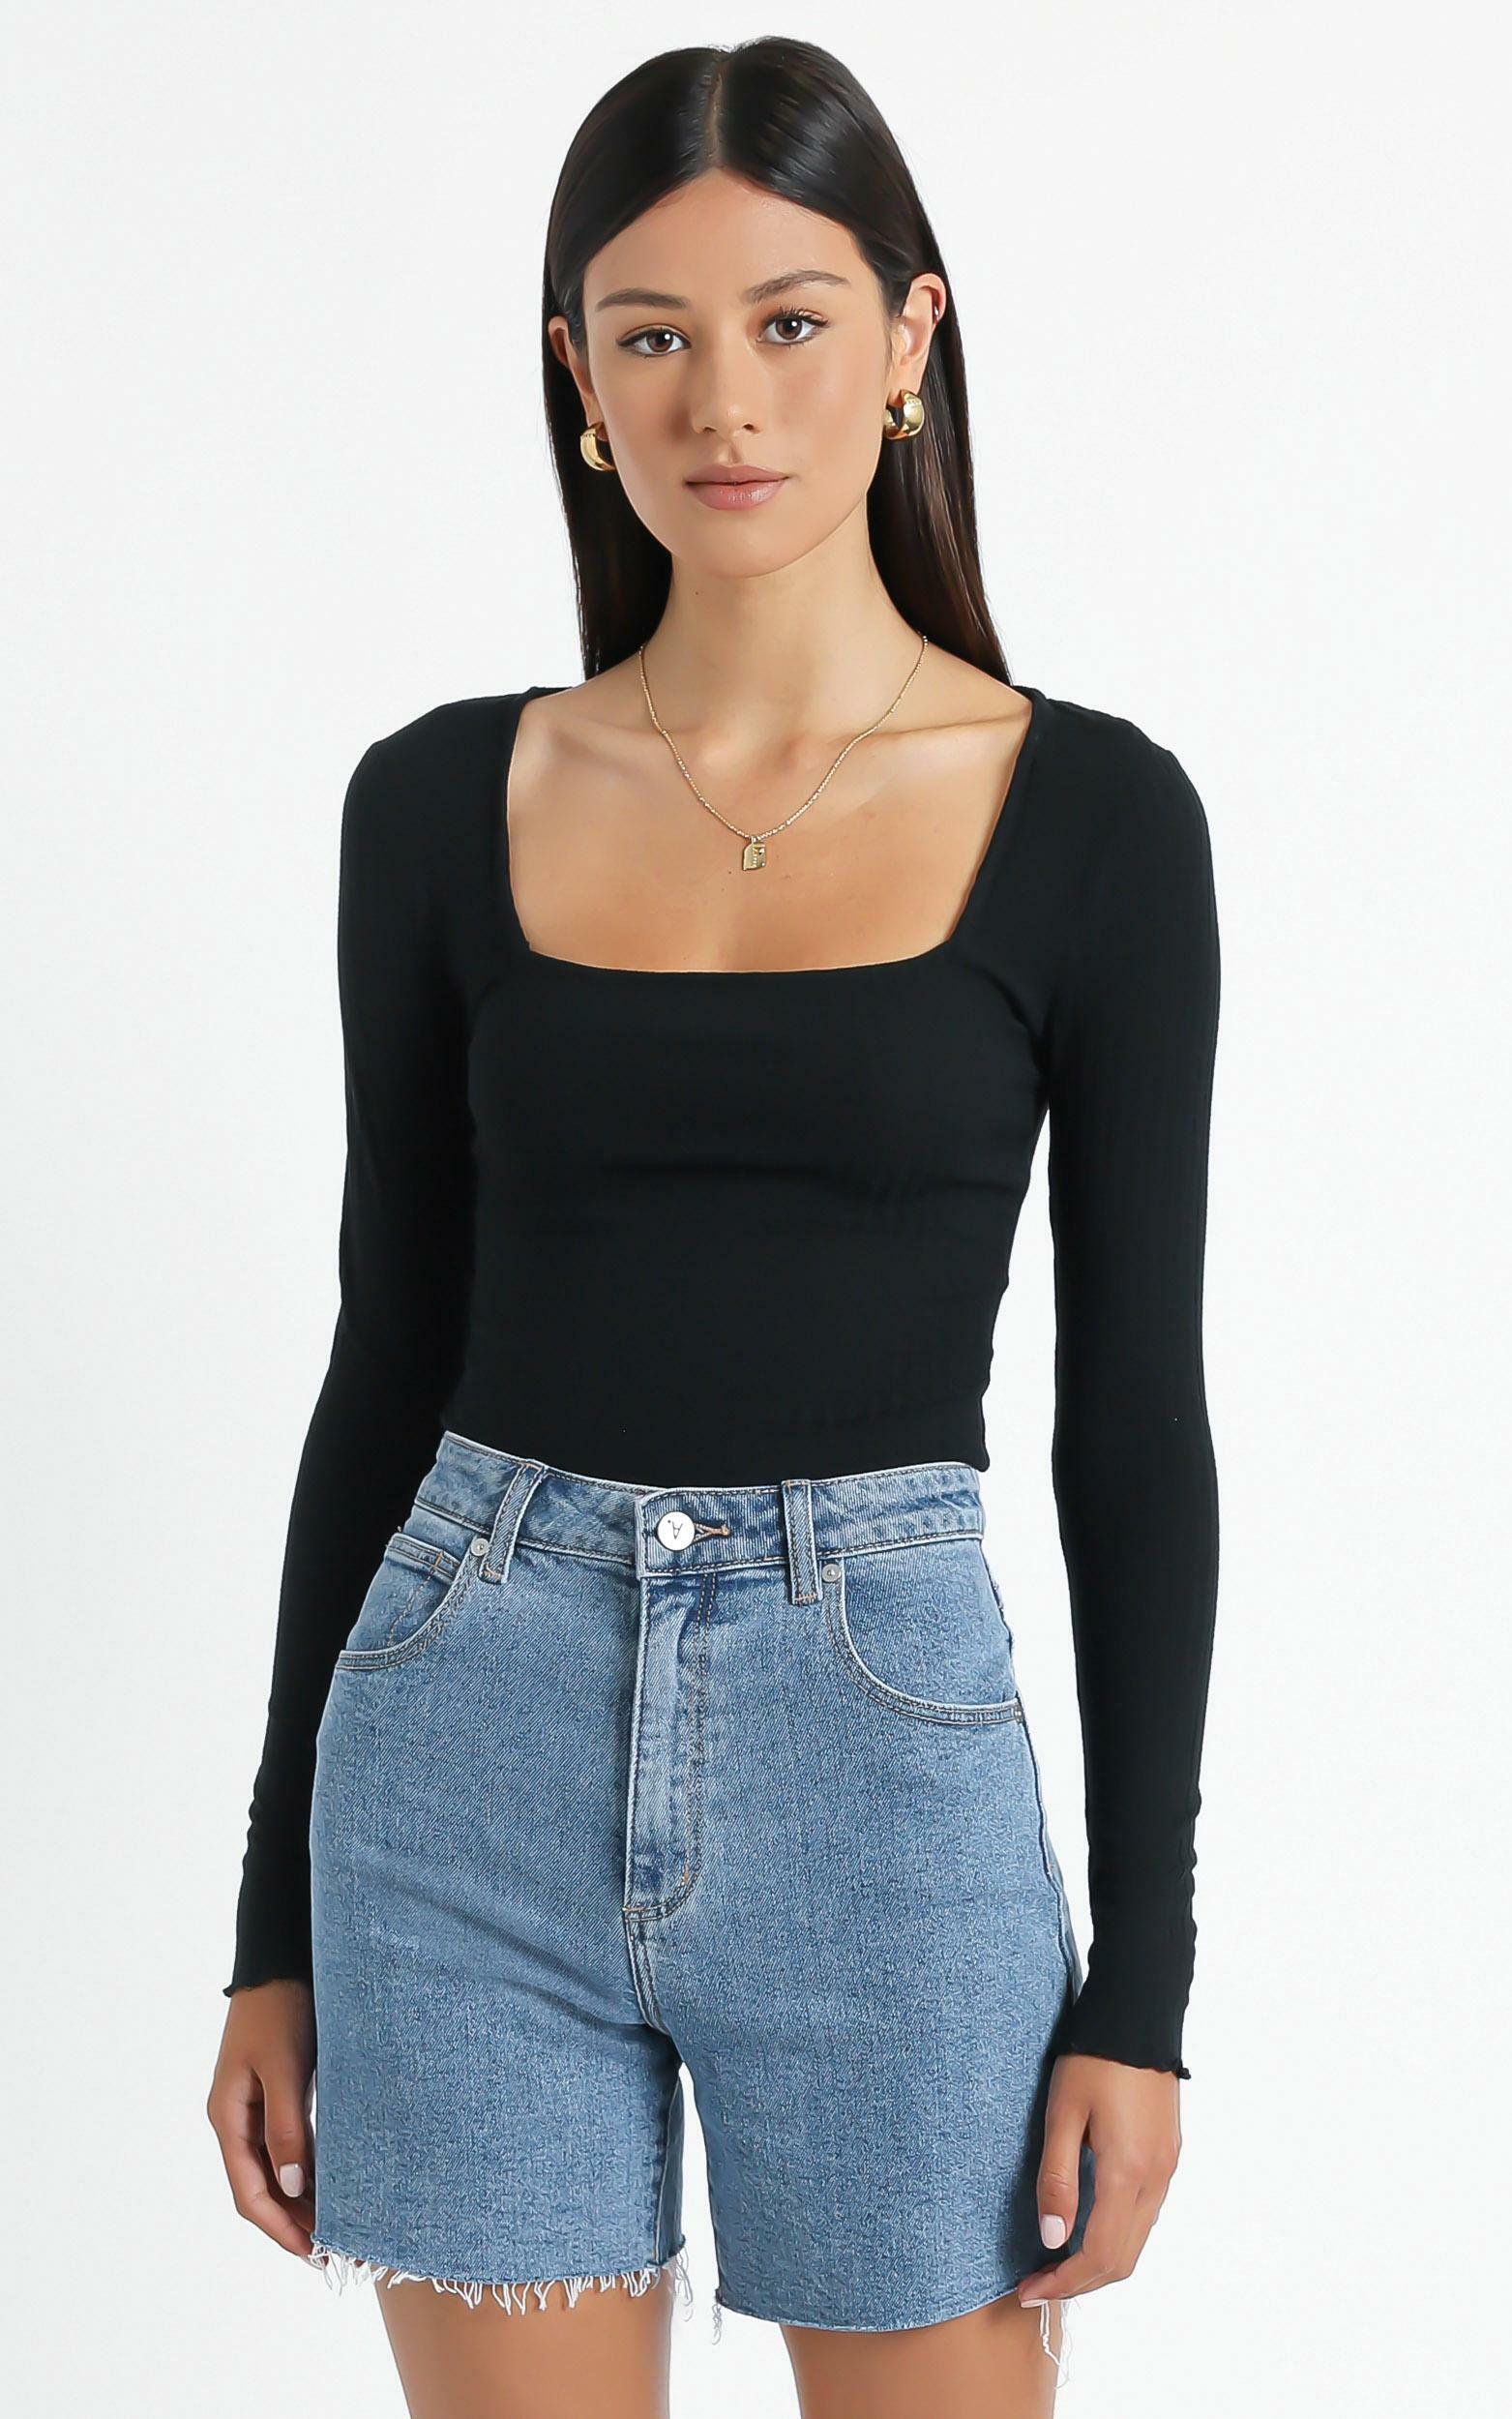 Complicate It Top in Black - 20, BLK1, hi-res image number null